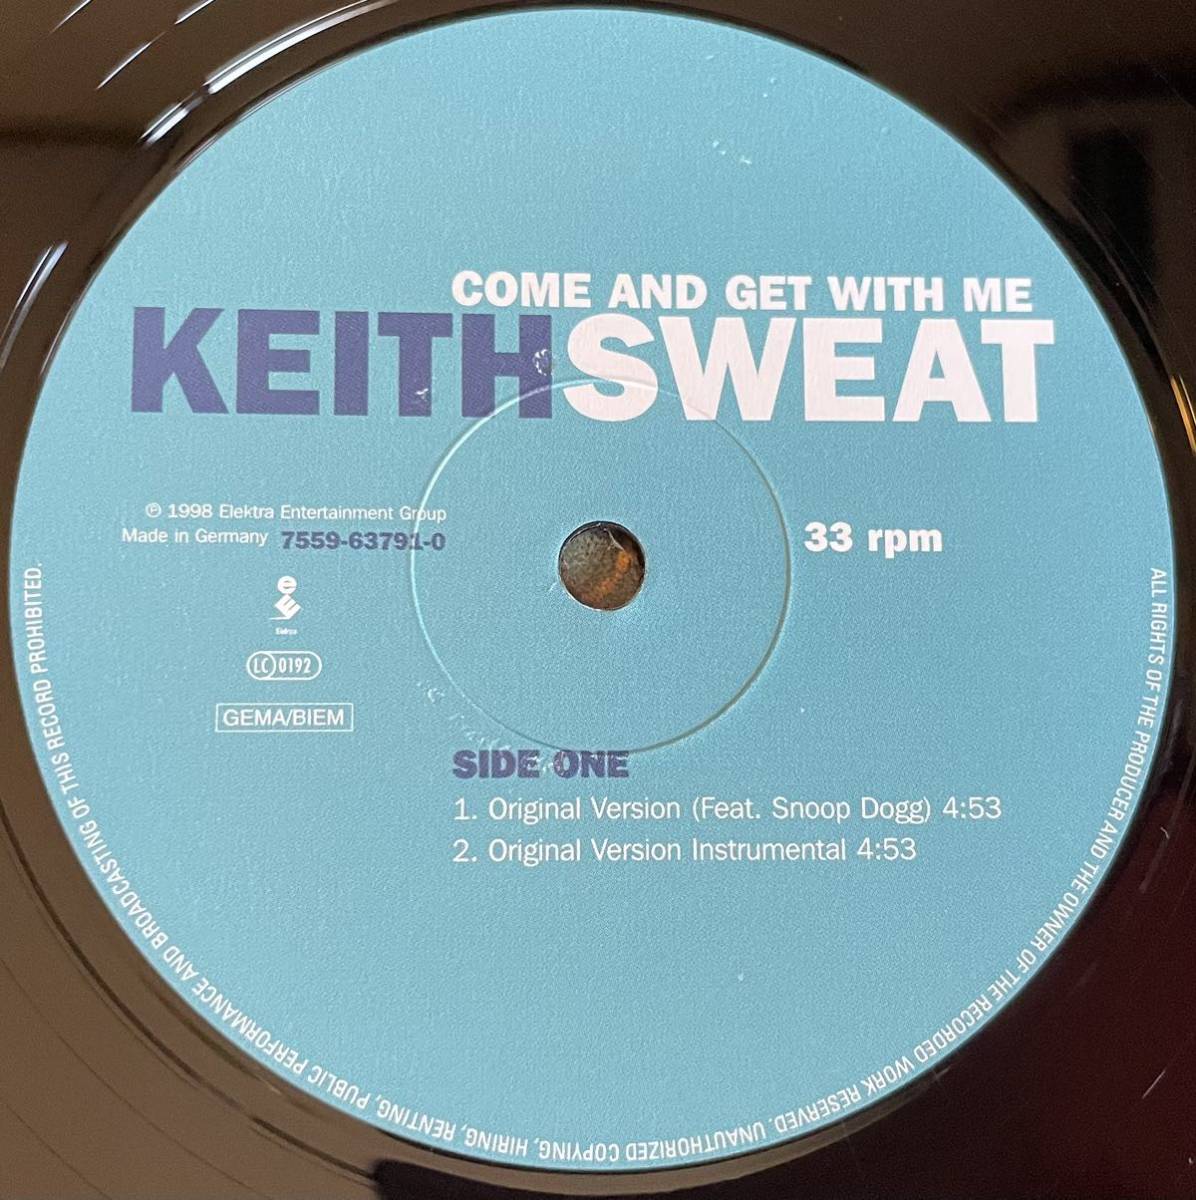 Keith Sweat Featuring Snoop Dogg / Come Get Wit Me 12inch盤 その他にもプロモーション盤 レア盤 人気レコード 多数出品。_画像4